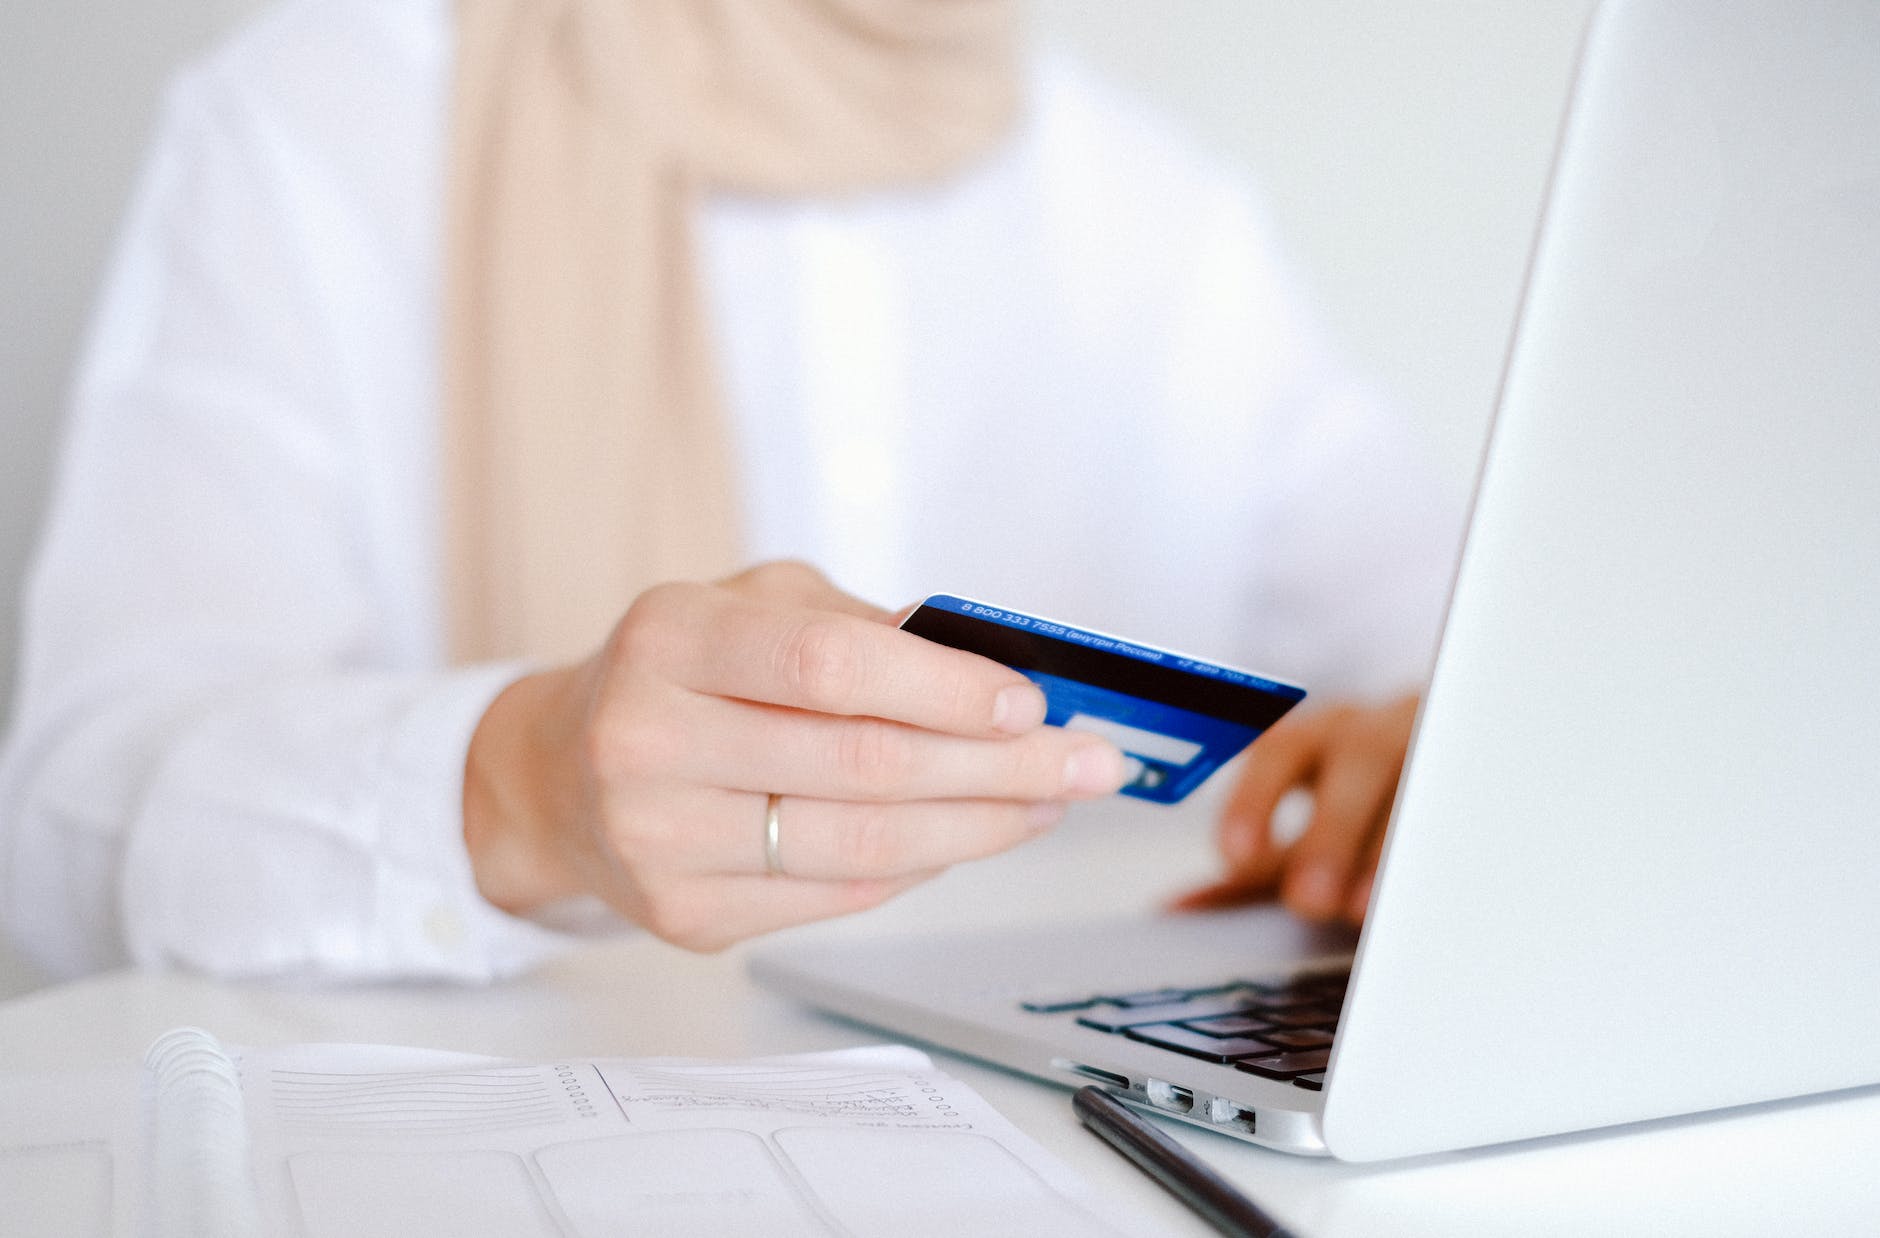 Is now the time to get into online payments?